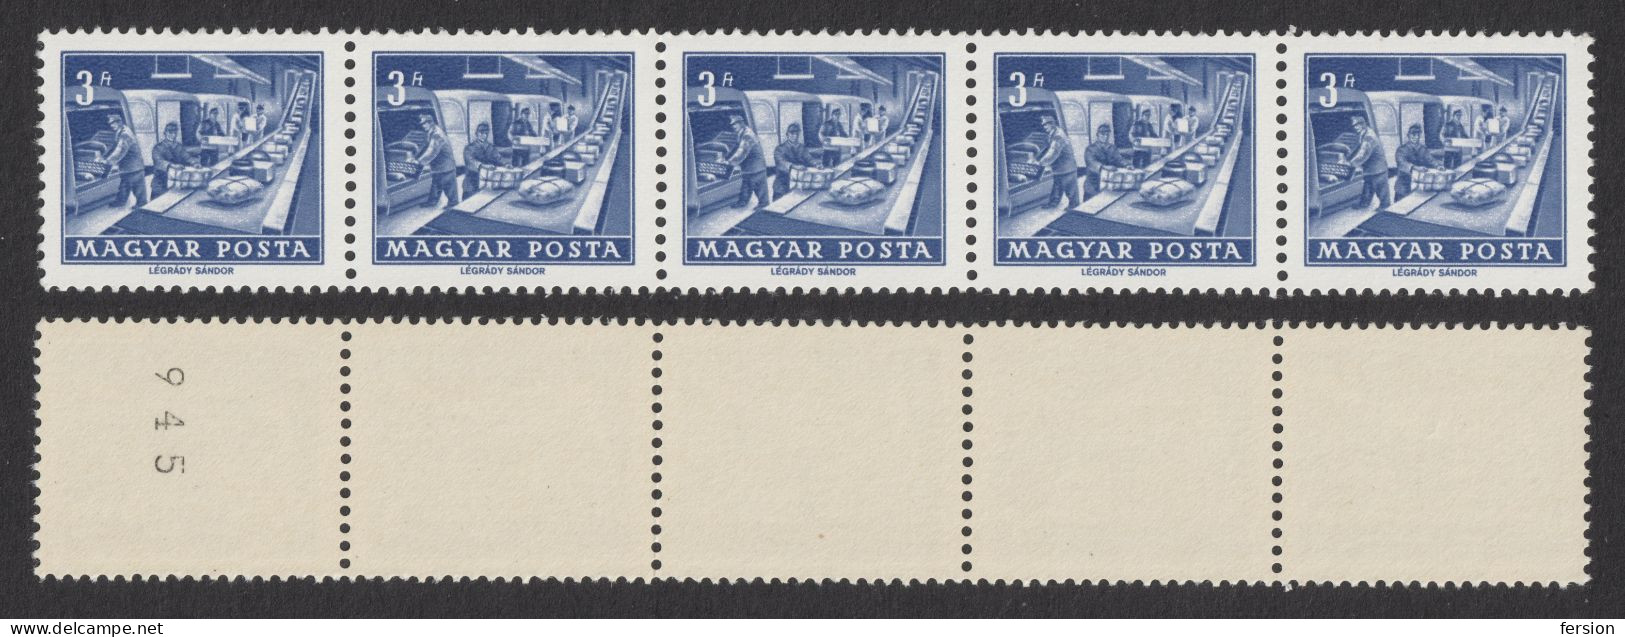 Parcel Post PACKET VAN TRUCK Postman 1963 1972 HUNGARY Roll Coil Automat Automatic Automata STAMP Numbered - Used - Poste